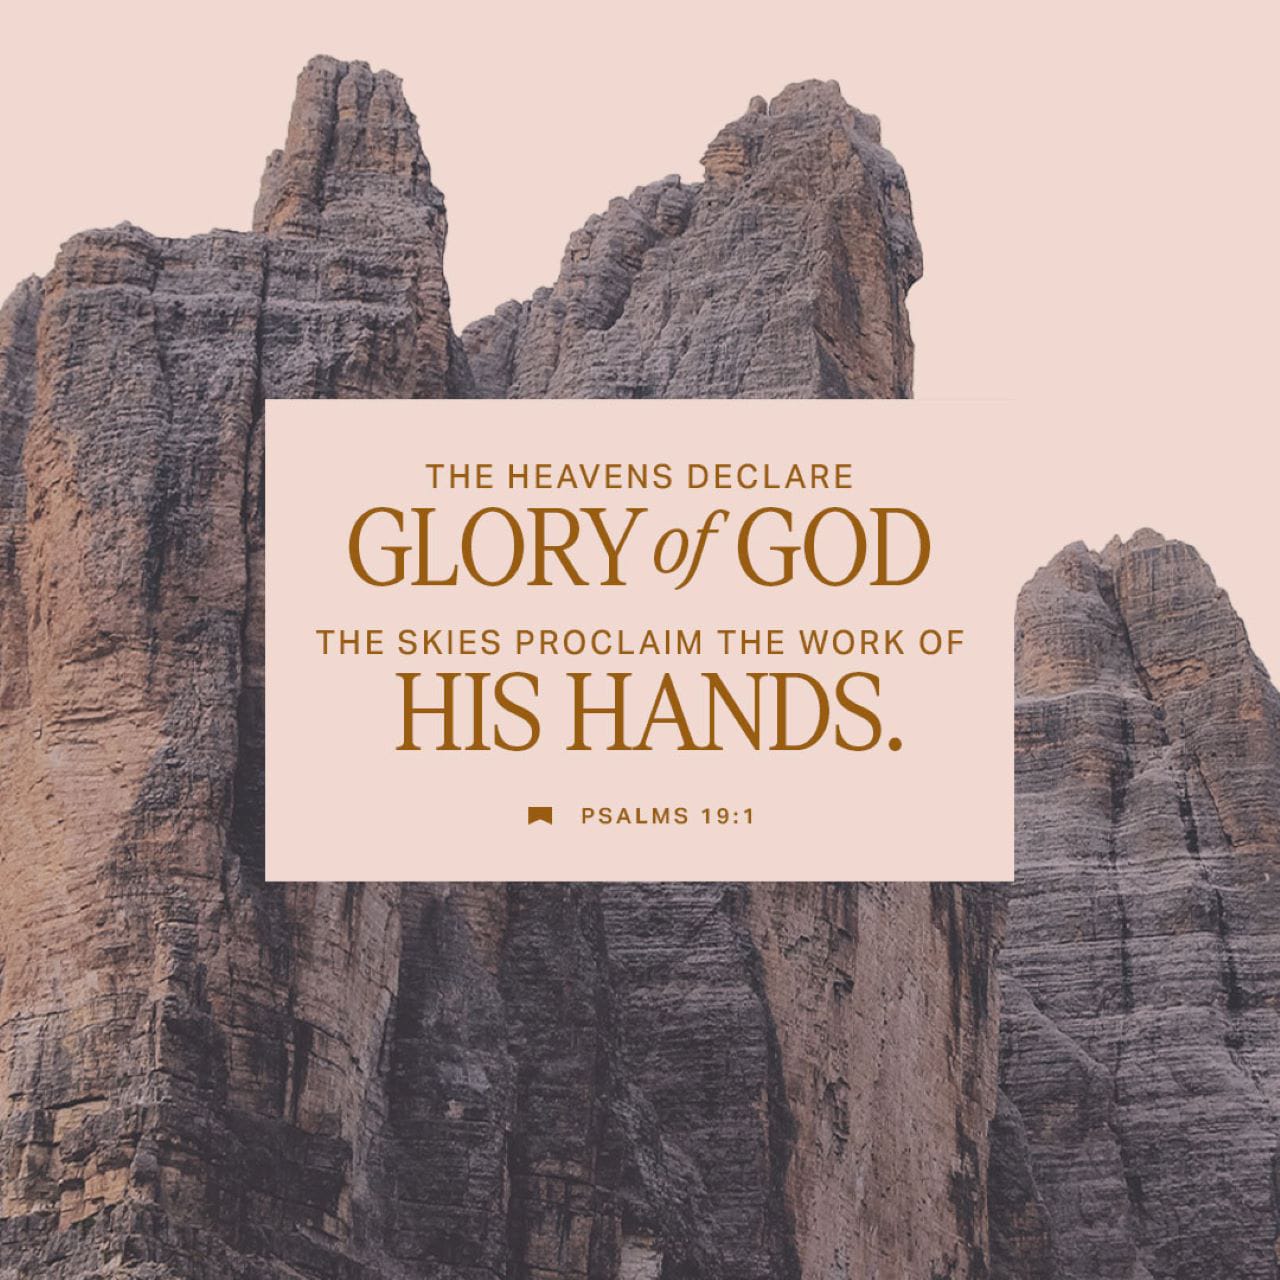 How Do the Heavens Declare the Glory of God? (Psalm 19:1 Meaning)